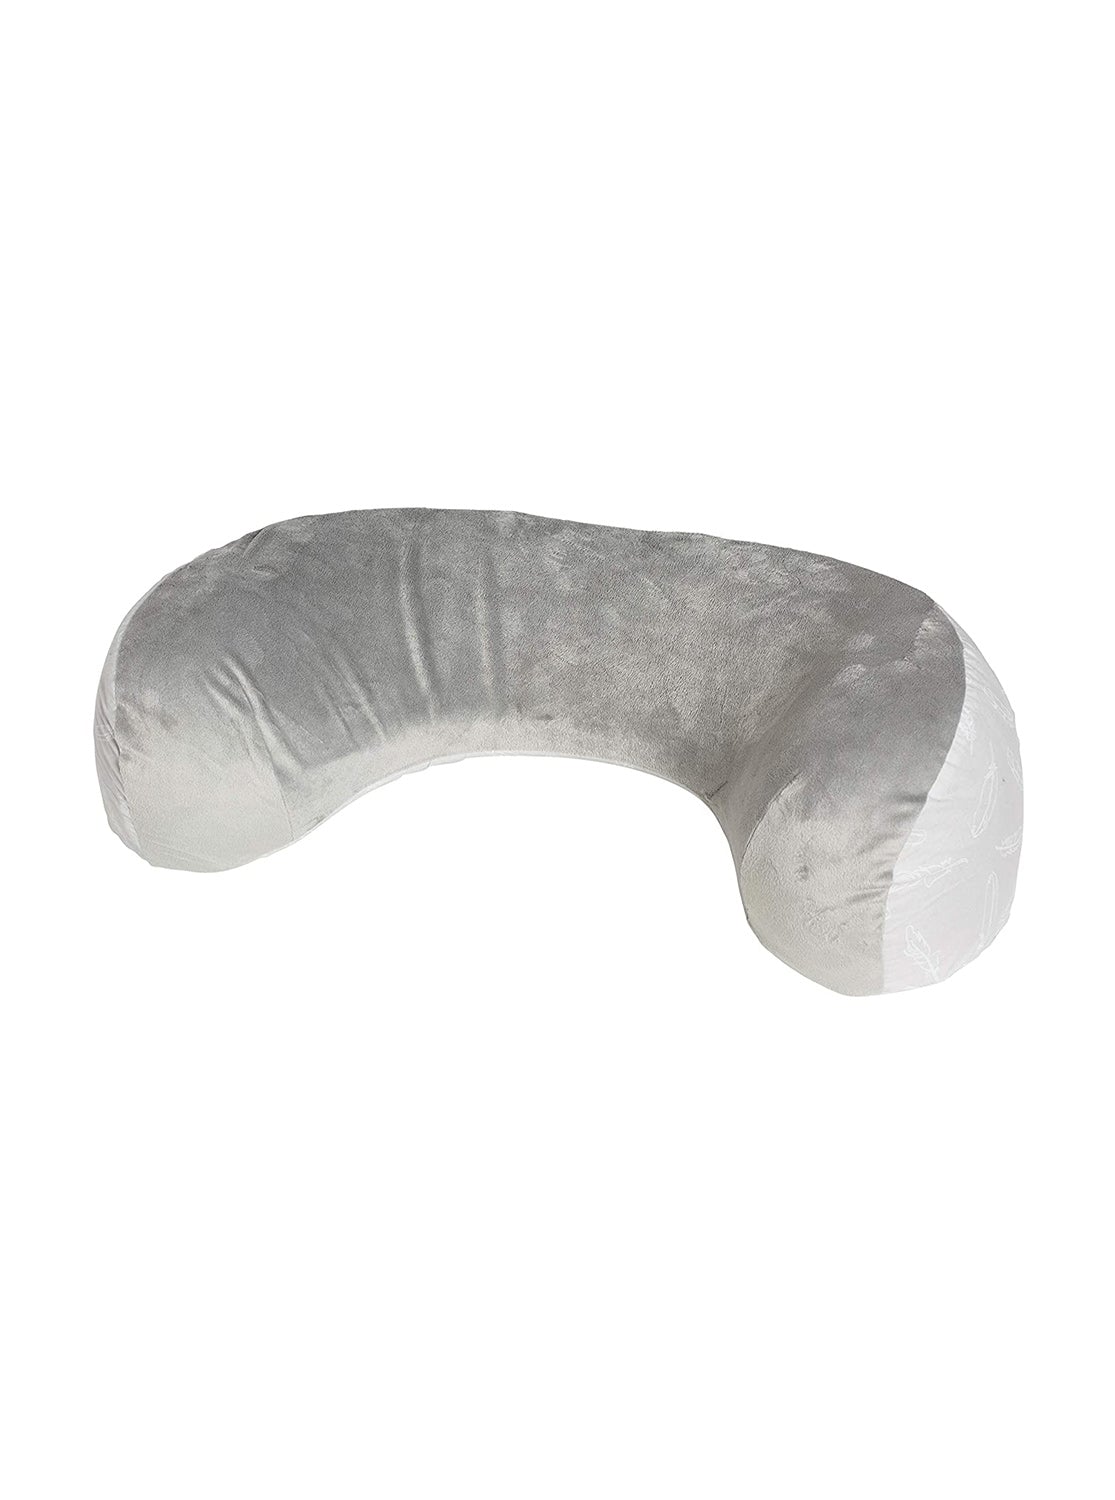 ERGOBABY Natural Curve Nursing Pillow Cover - ANB Baby -$20 - $50